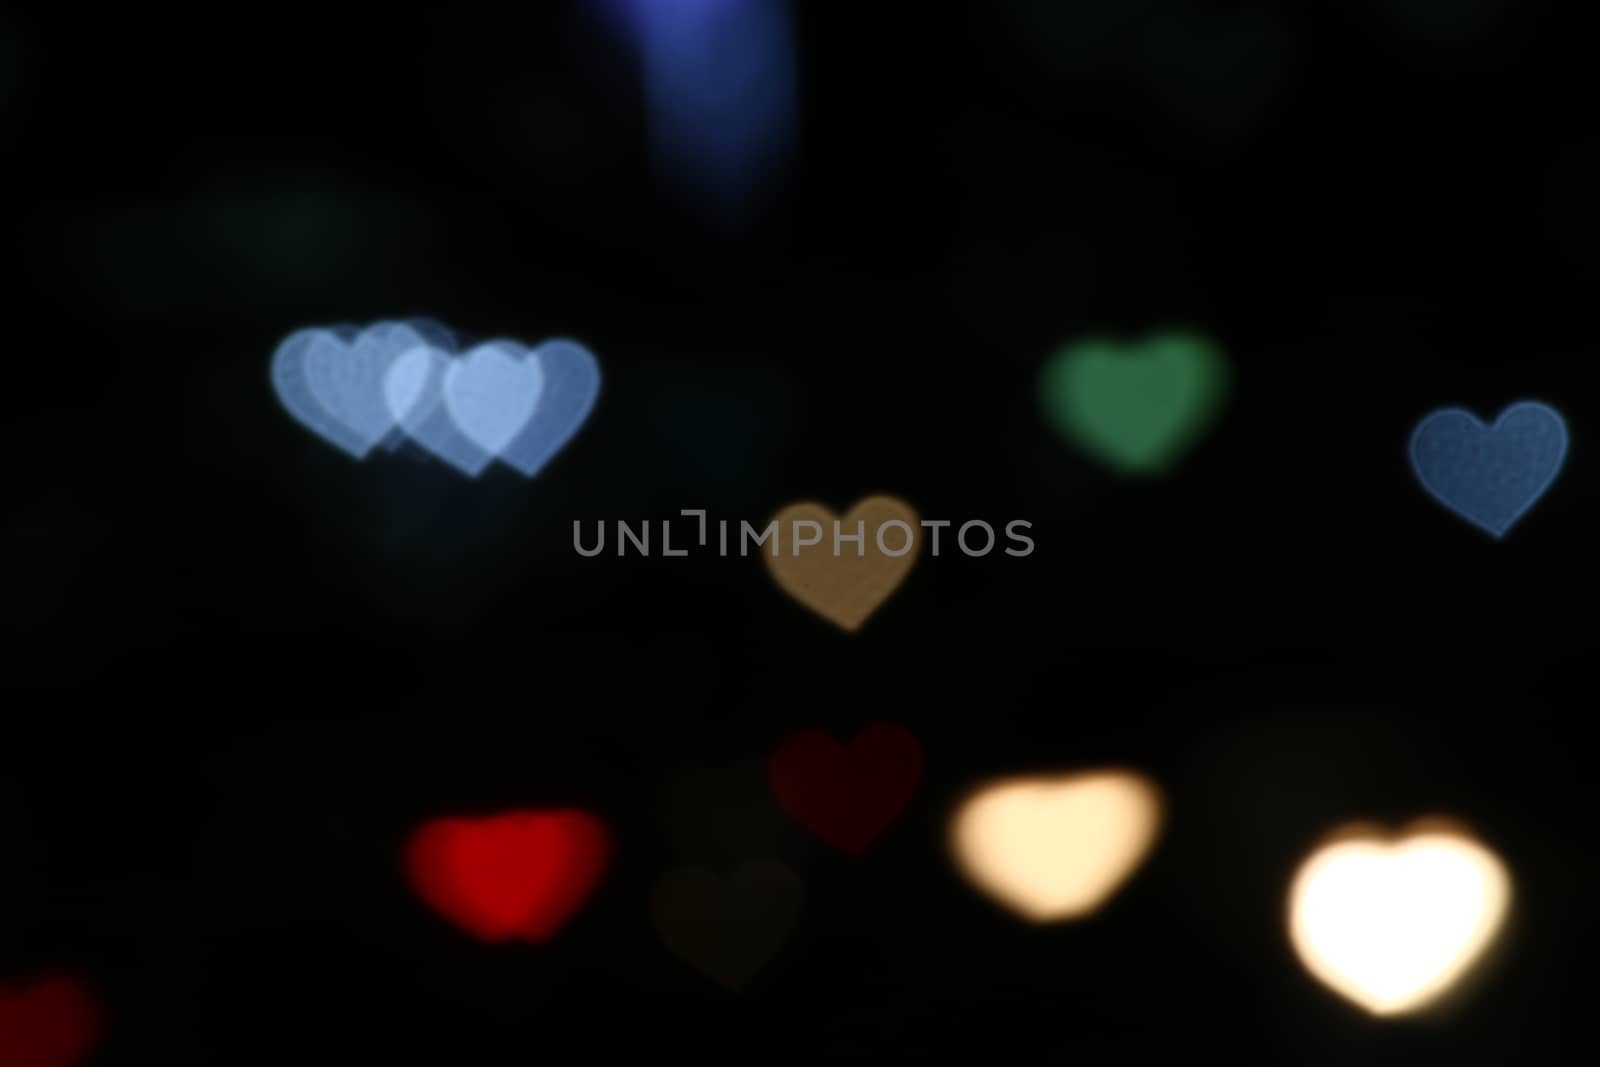 colorful heart-shaped on black background, lighting bokeh for wallpaper, blurred bokeh for valentine's day background, love pictures background, lighting heart shape soft at night time by cgdeaw